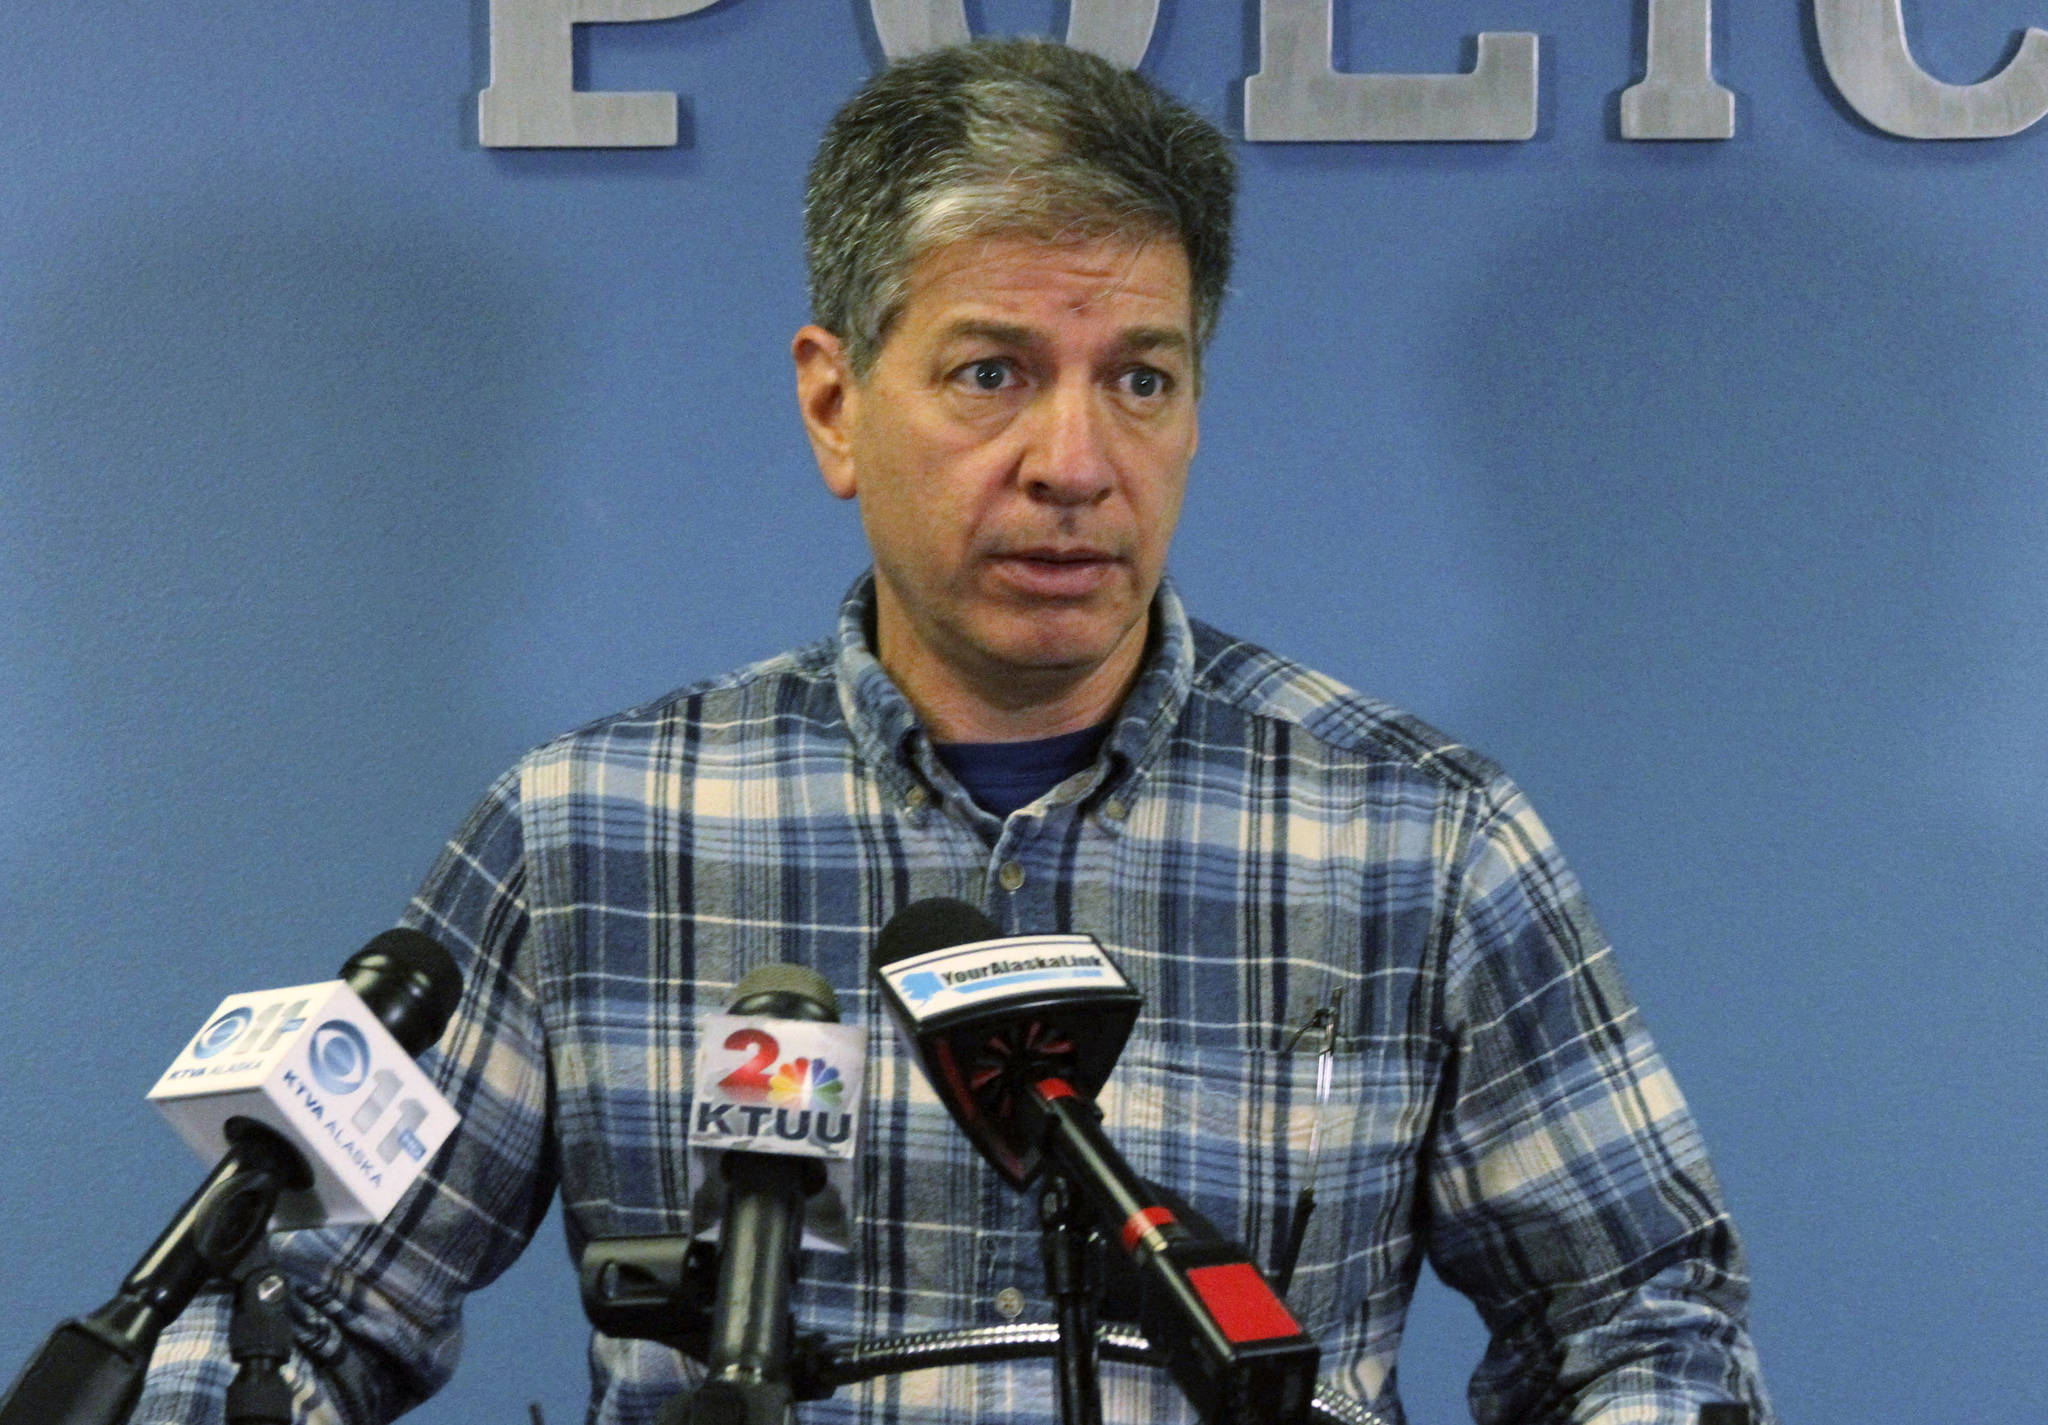 Anchorage Mayor Ethan Berkowitz addresses reporters at a news conference in Anchorage in November 2016. Berkowitz on Monday, Oct. 12, 2020, admitted to having an inappropriate relationship with a female reporter, three days after she made online allegations against the married Berkowitz. (AP Photos / Mark Thiessen)